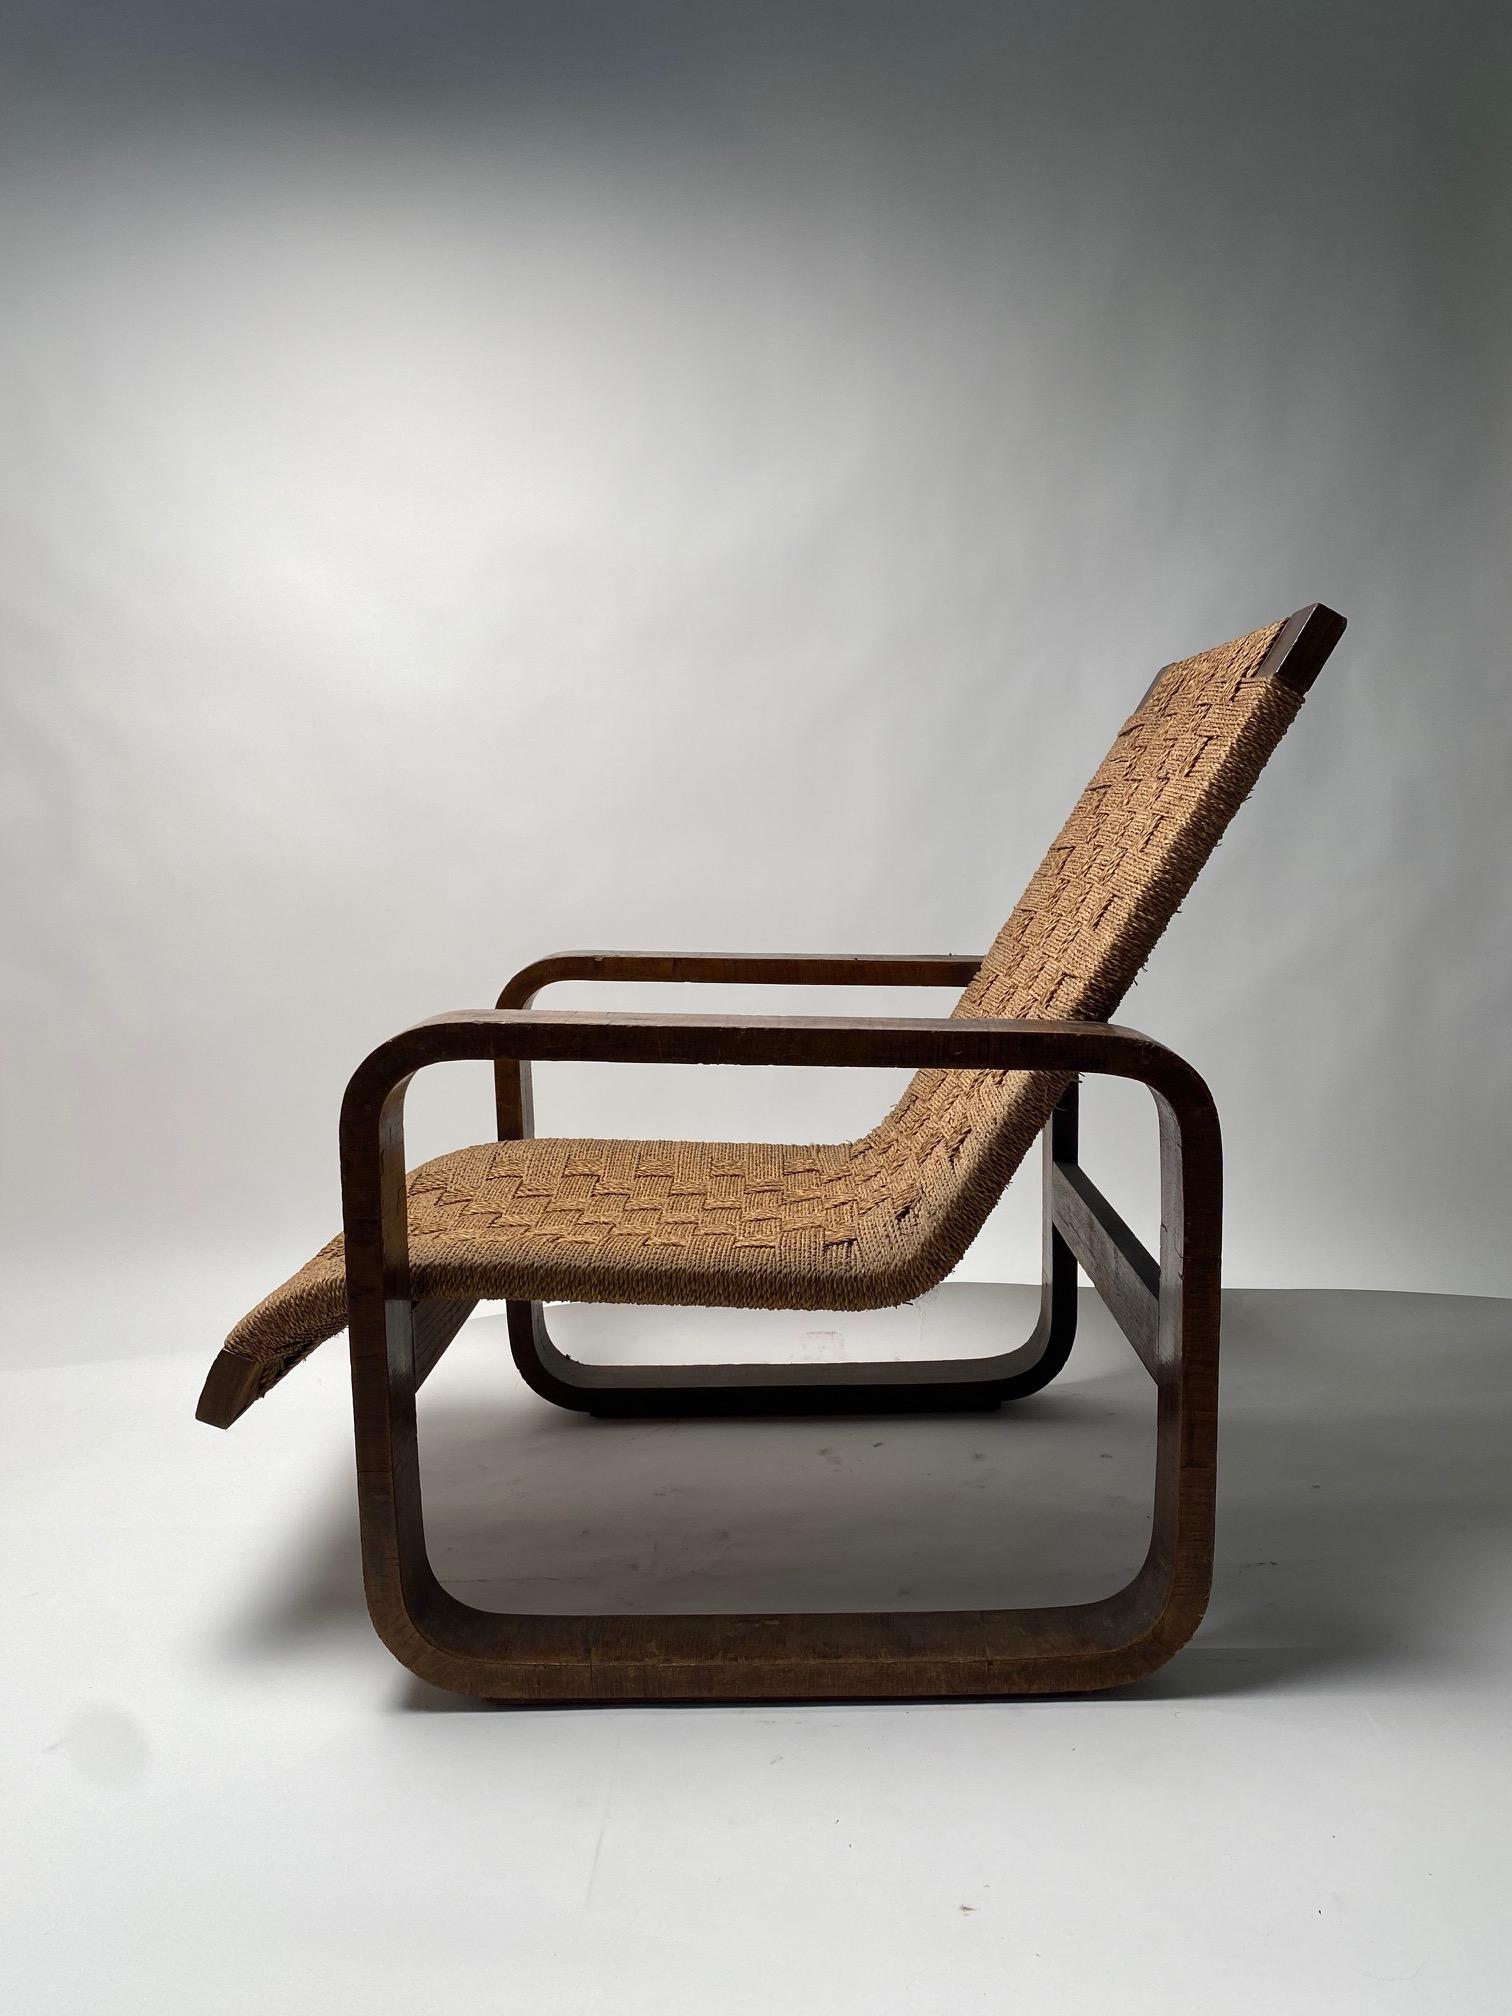 Art Deco Sculptural Armchair in wood and rope, Giuseppe Pagano (Attr), Italy, 1940s For Sale